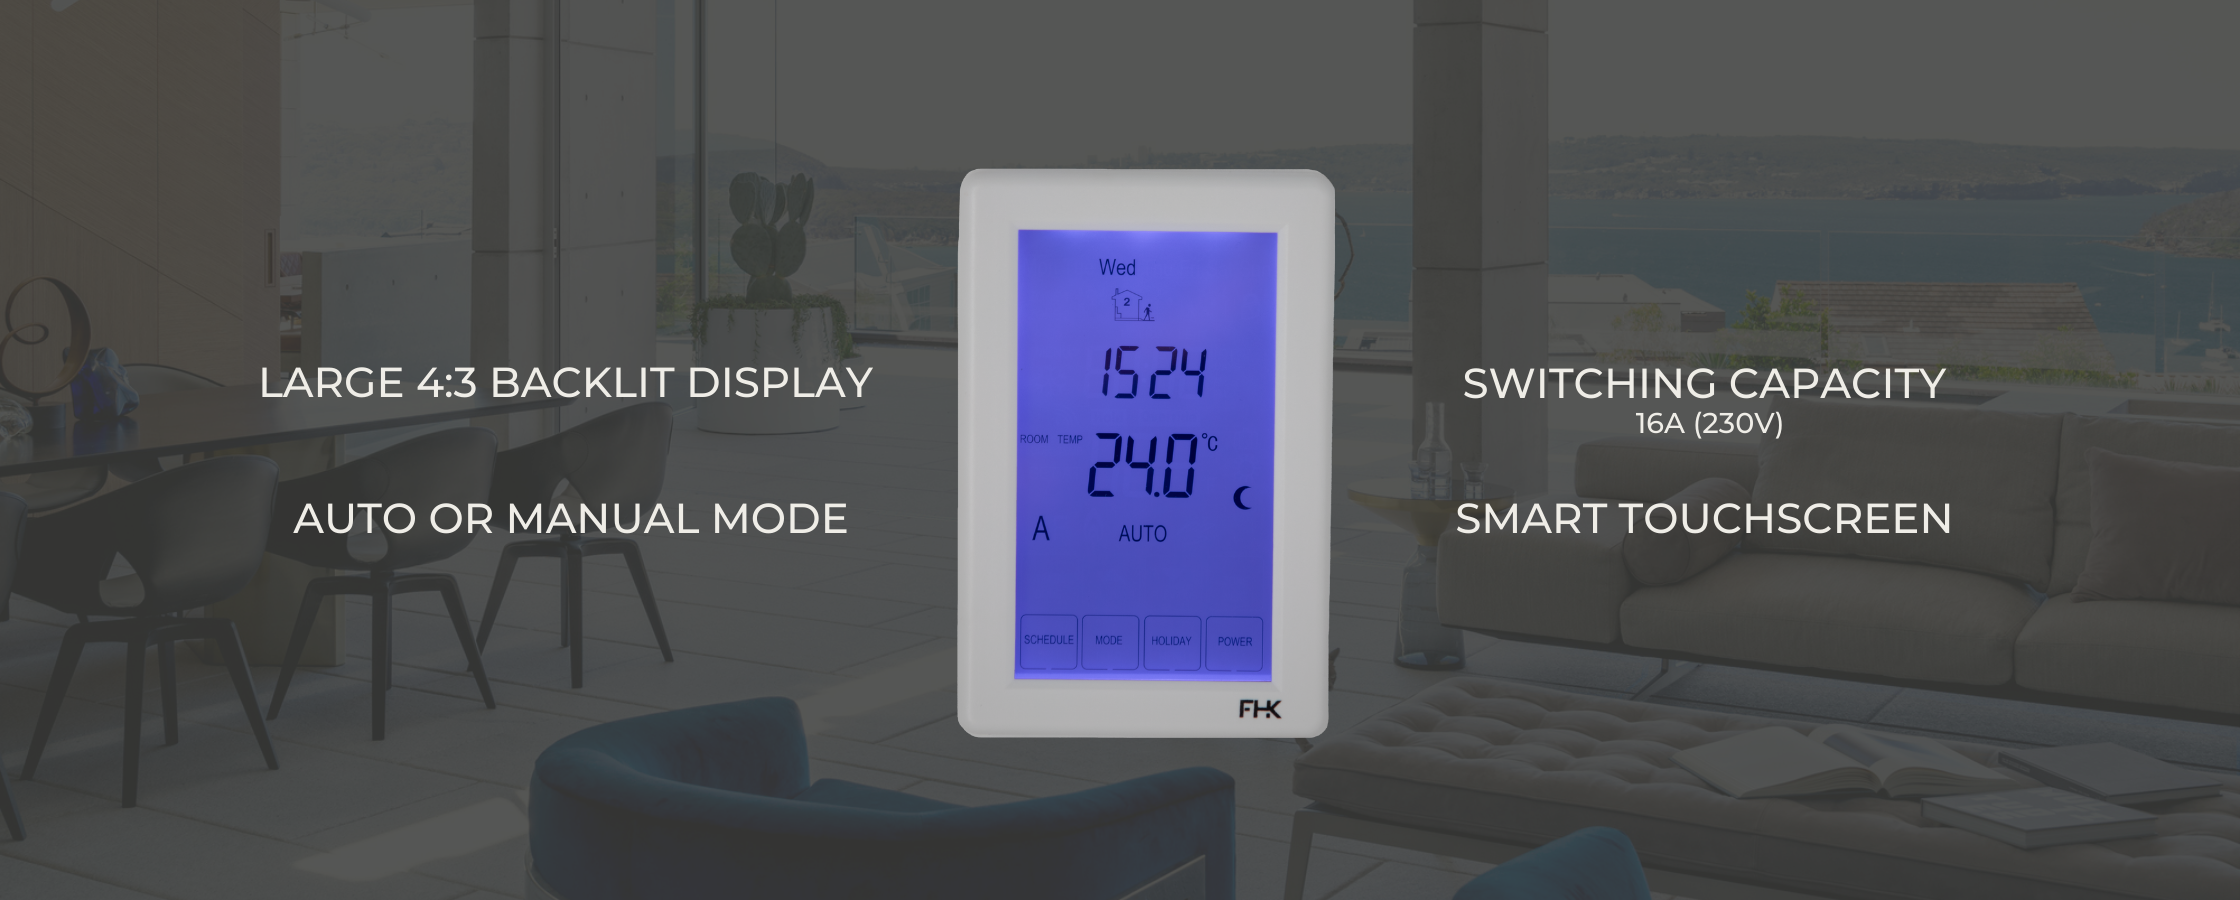 fhk-thermostat-123.png